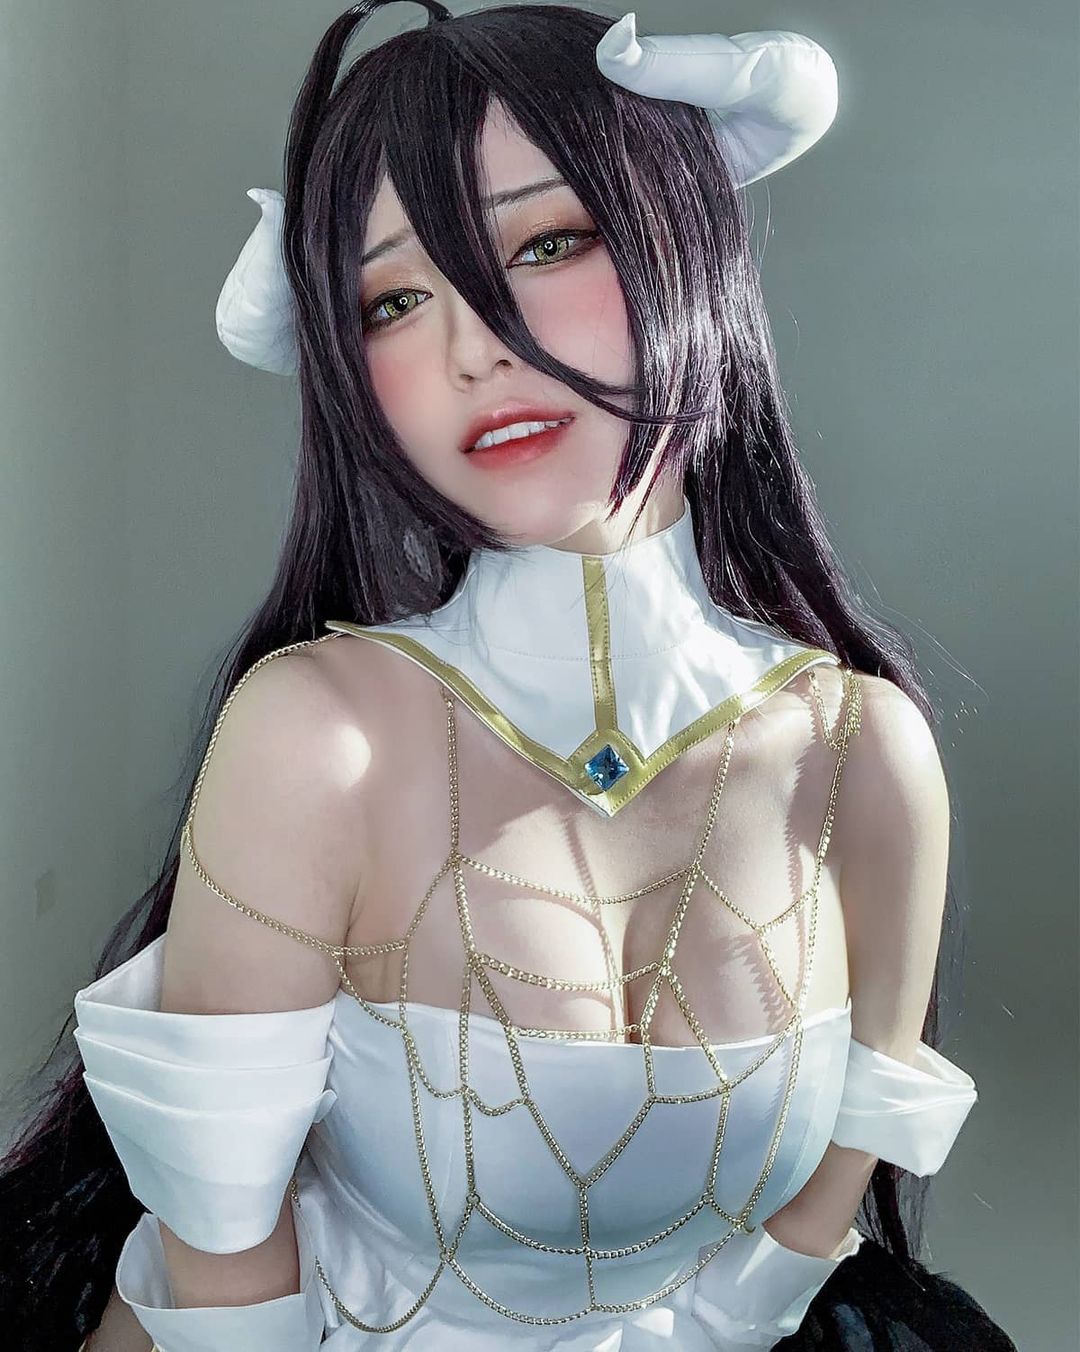 Overlord cosplay